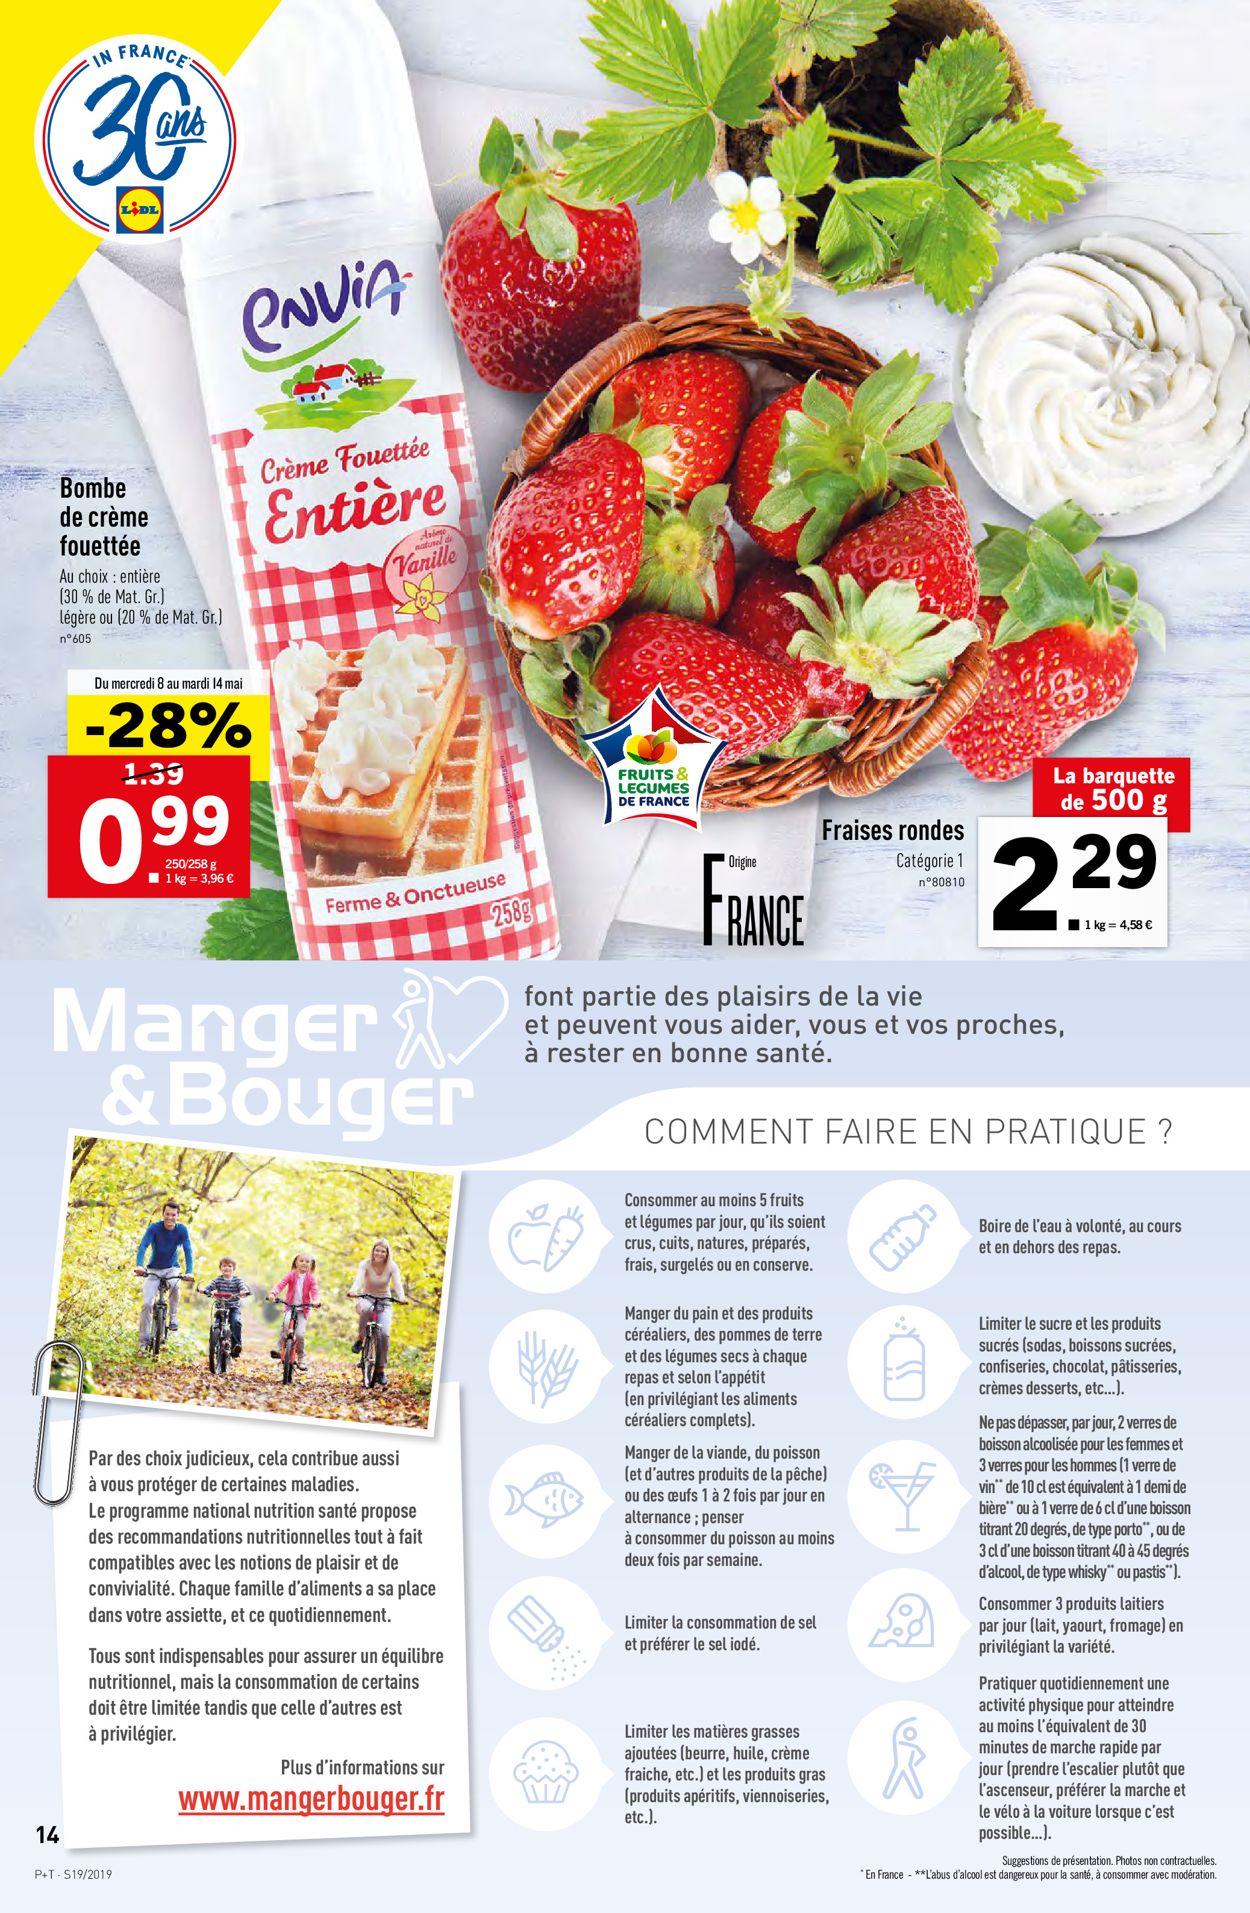 Lidl Catalogue - 08.05-14.05.2019 (Page 14)